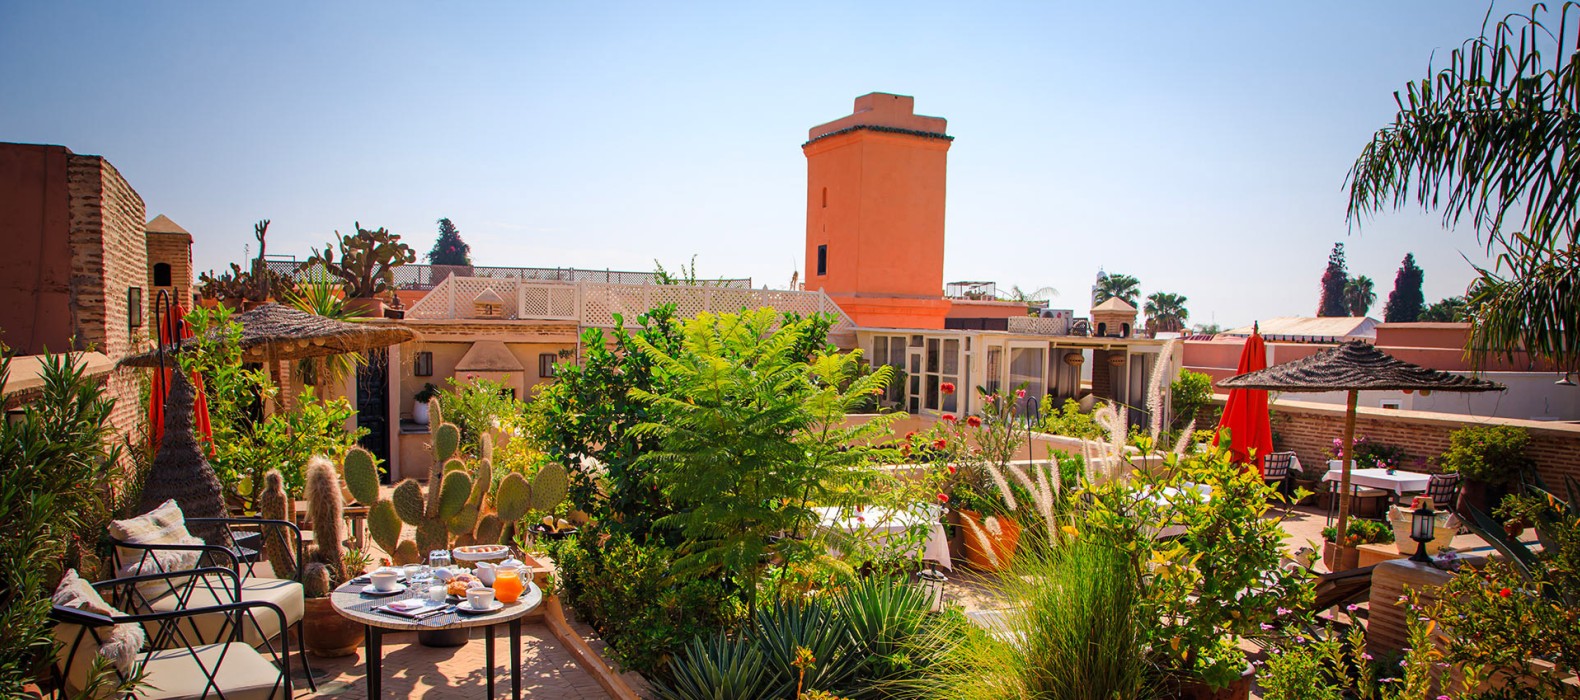 Rooftop area view of Riad Yazid in Marrakech